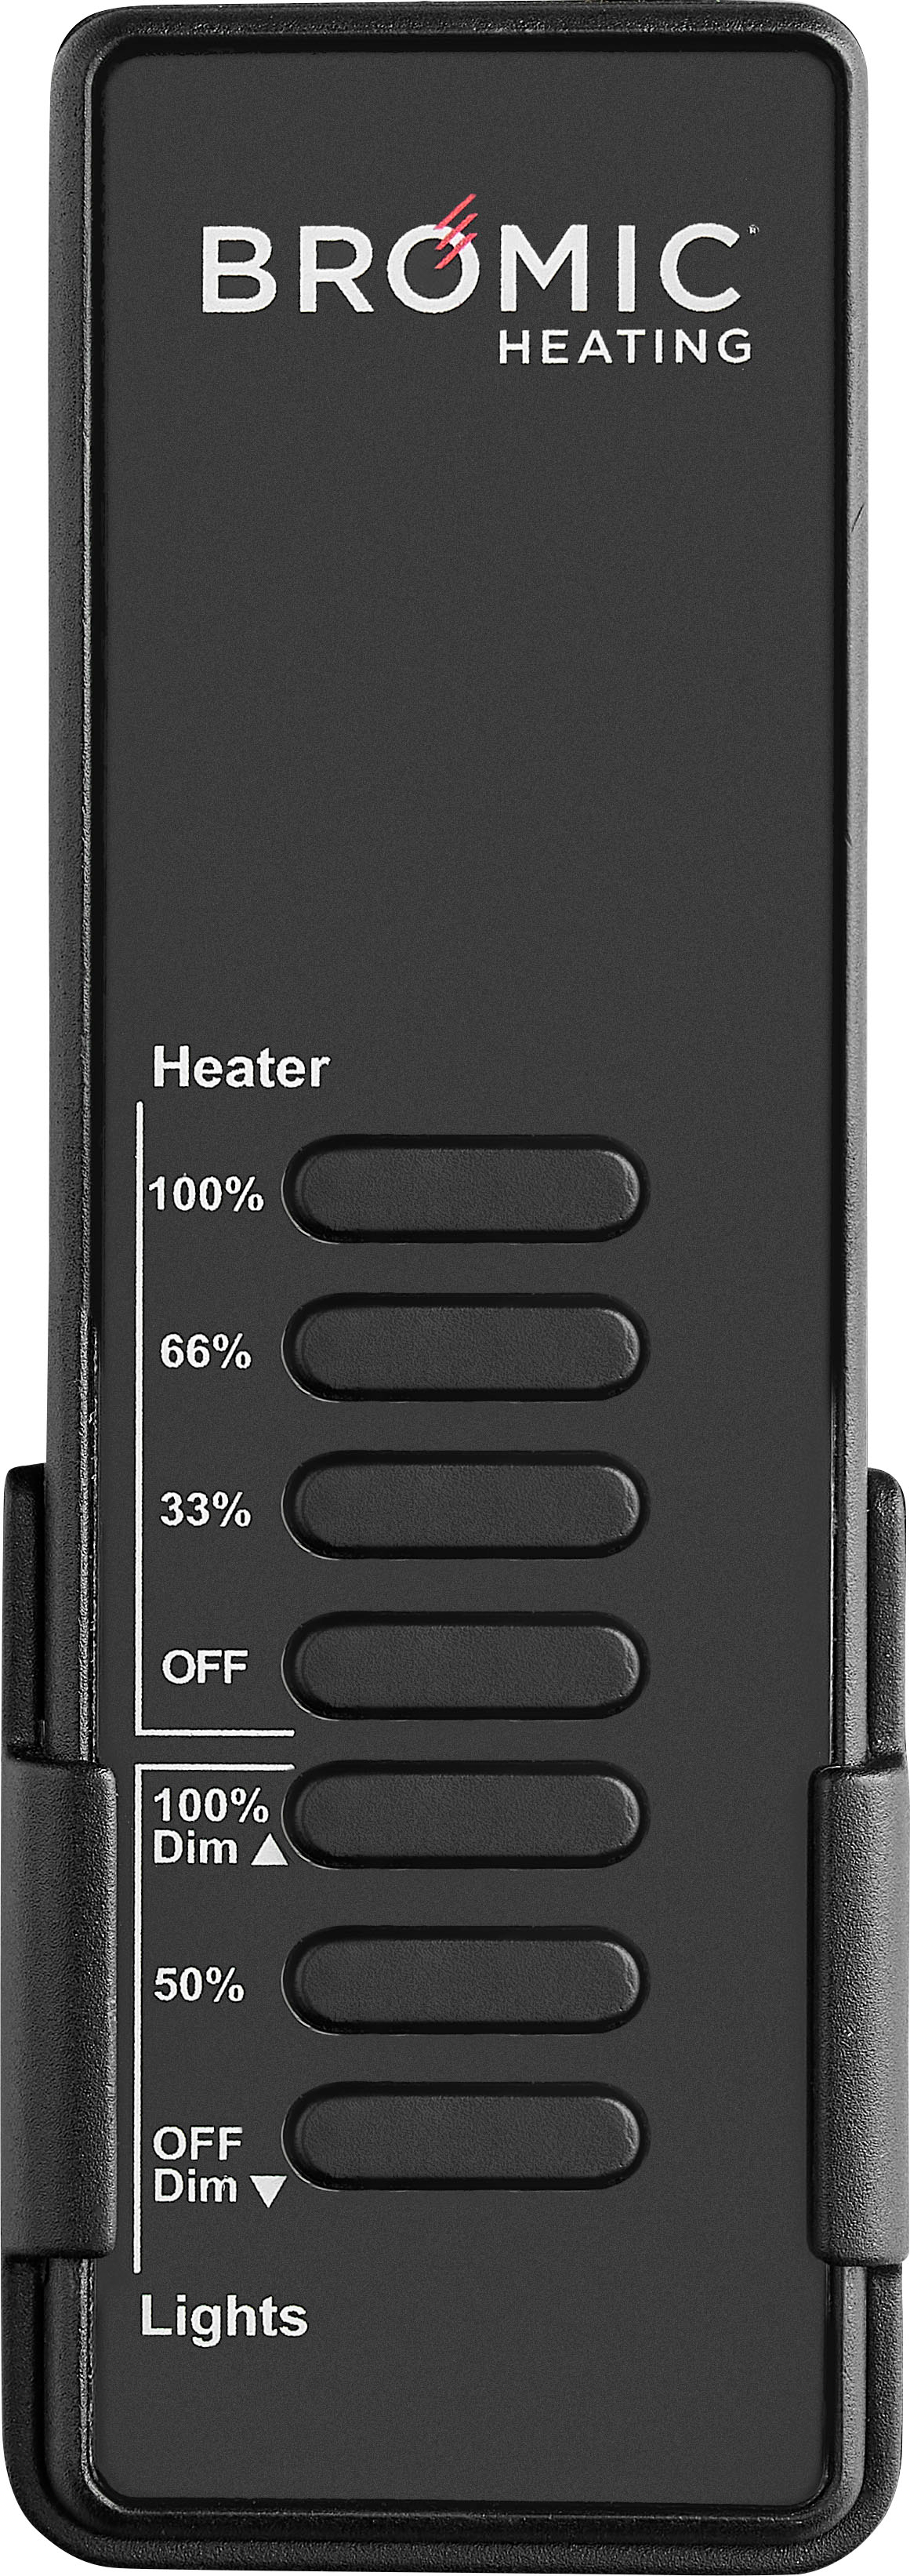 Angle View: Bromic Heating - Outdoor Heater - Eclipse Electric & Dimmer Controller - 2900W - 220-240V - Black